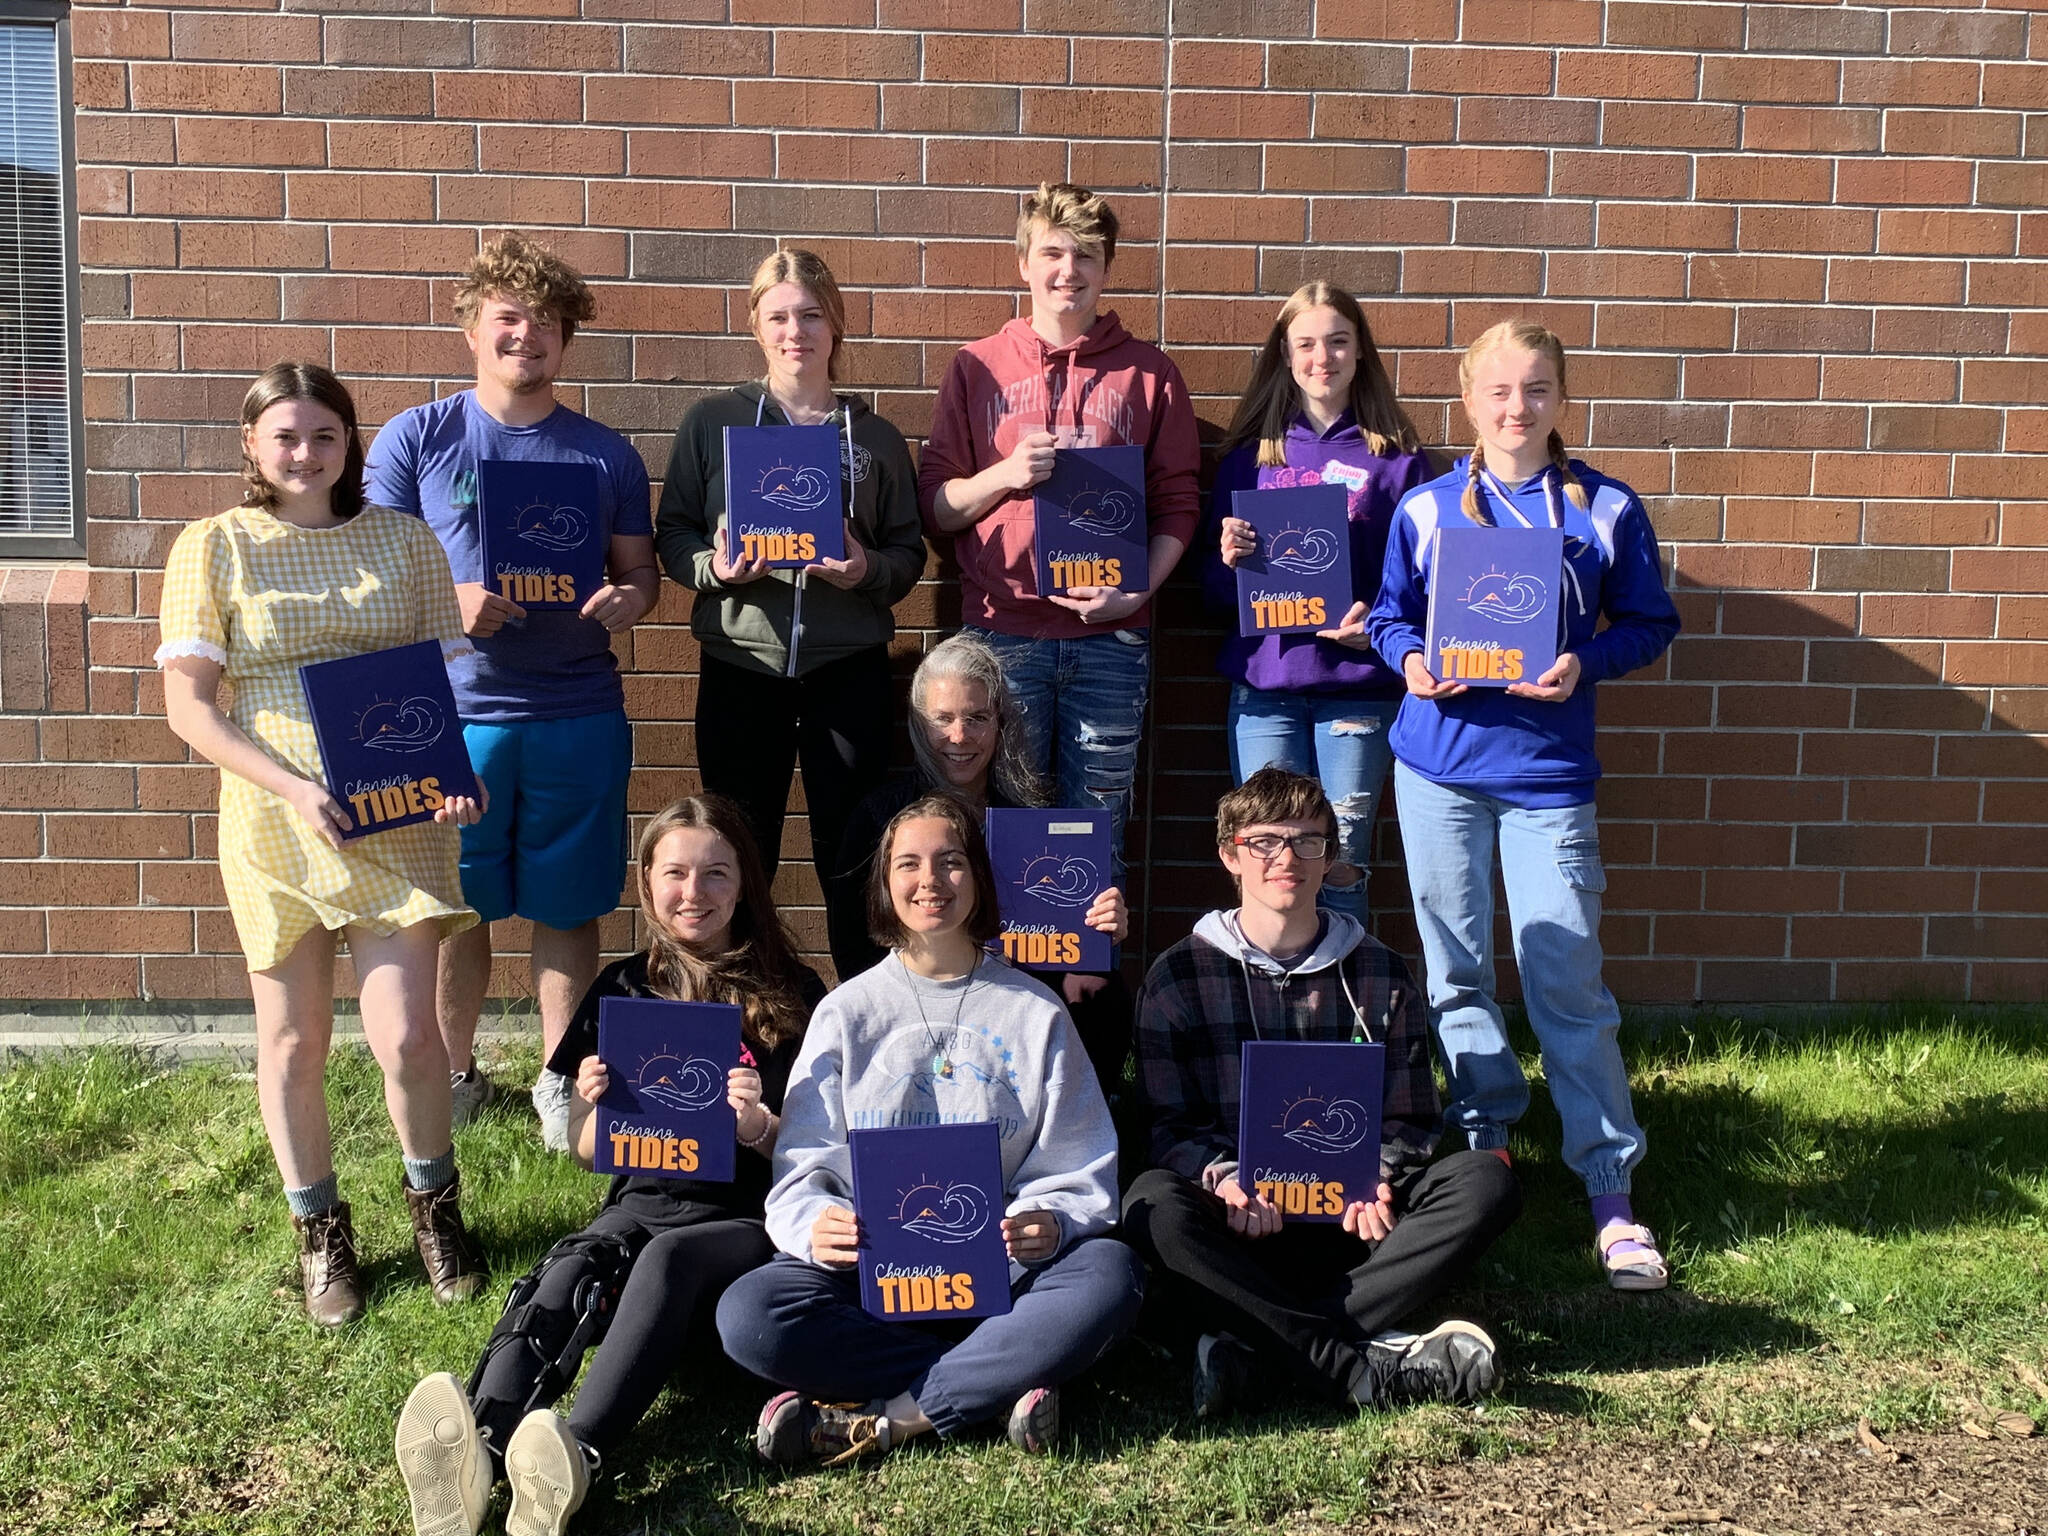 The Homer High School Mariner Logbook staff pose with the 2022 edition at Homer High School in Homer, Alaska. In the back row from left to right are Courtney Rider, Kamdyn Doughty, Bethany Engebretsen, Tyson Walker, Ally High and Charlotte Fraley. In the front row from left to right are Kapitolina Reutov, Mariah McGuire (editor), Suzanne Bishop (advisor) and Damon Weisser. (Photo provided)